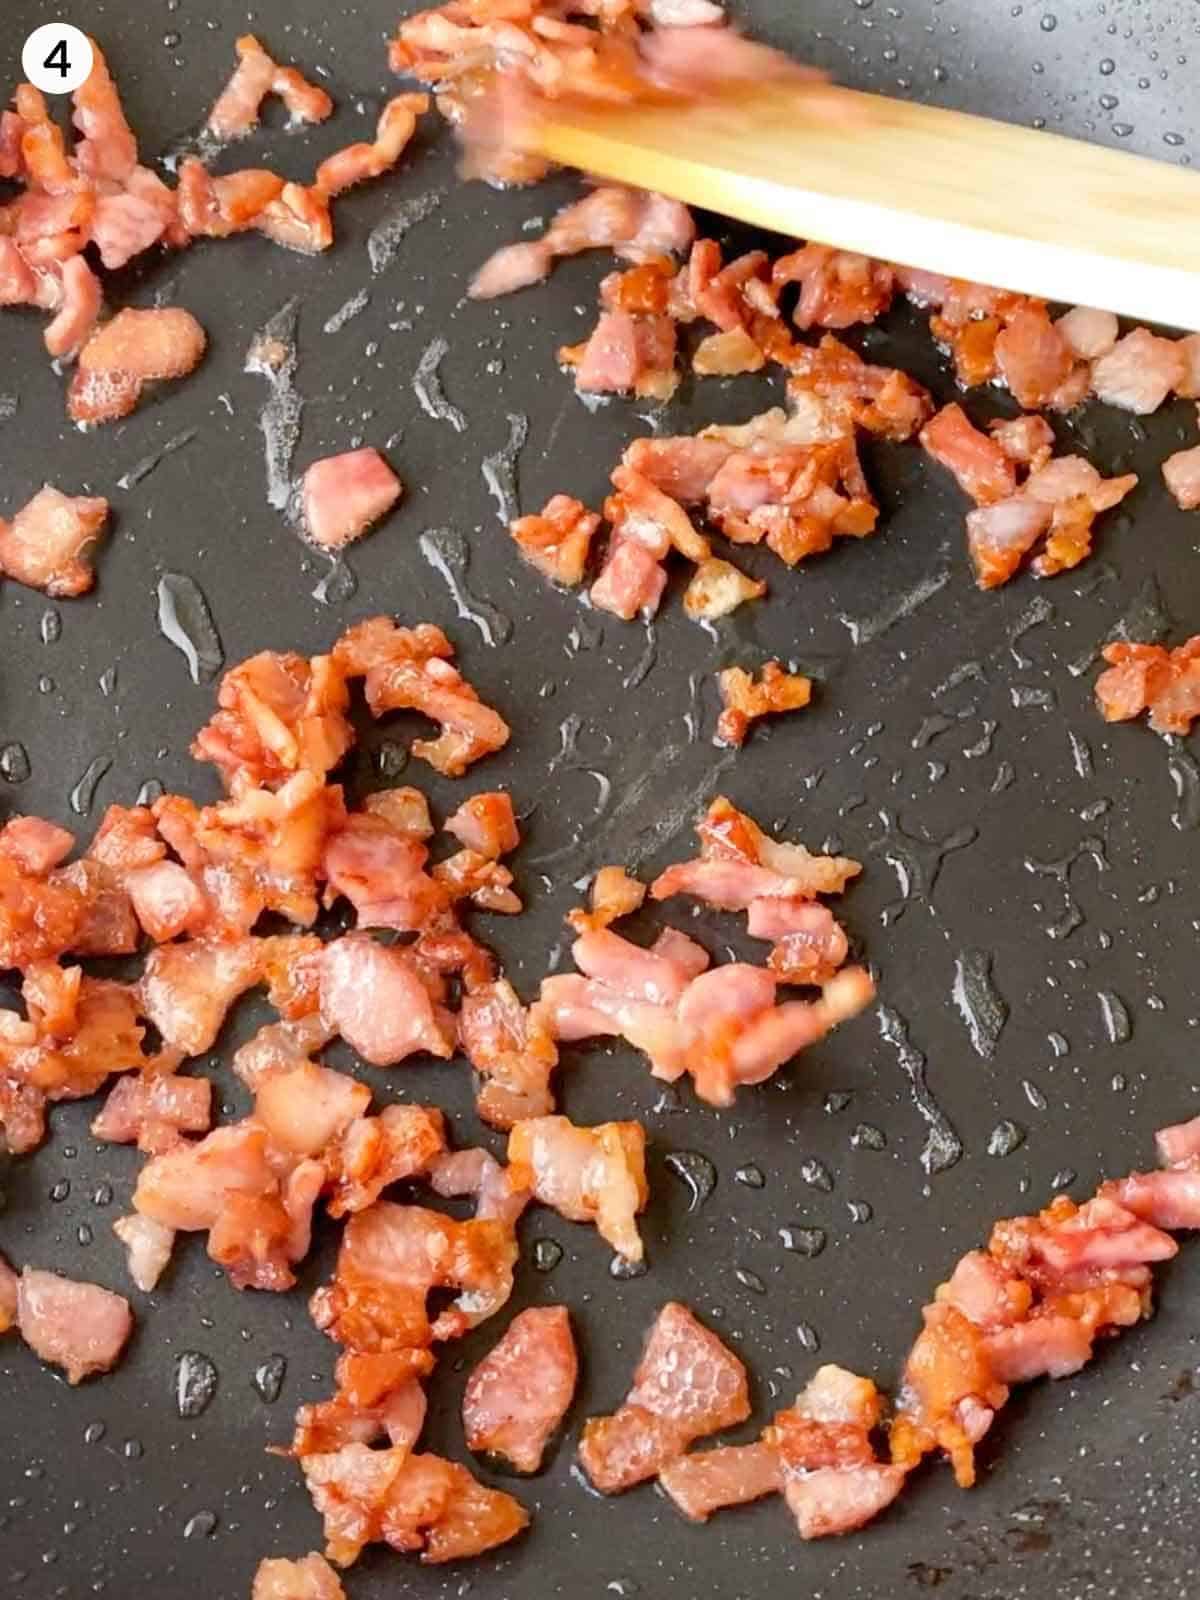 Frying bacon bits in a saucepan with a wooden spoon